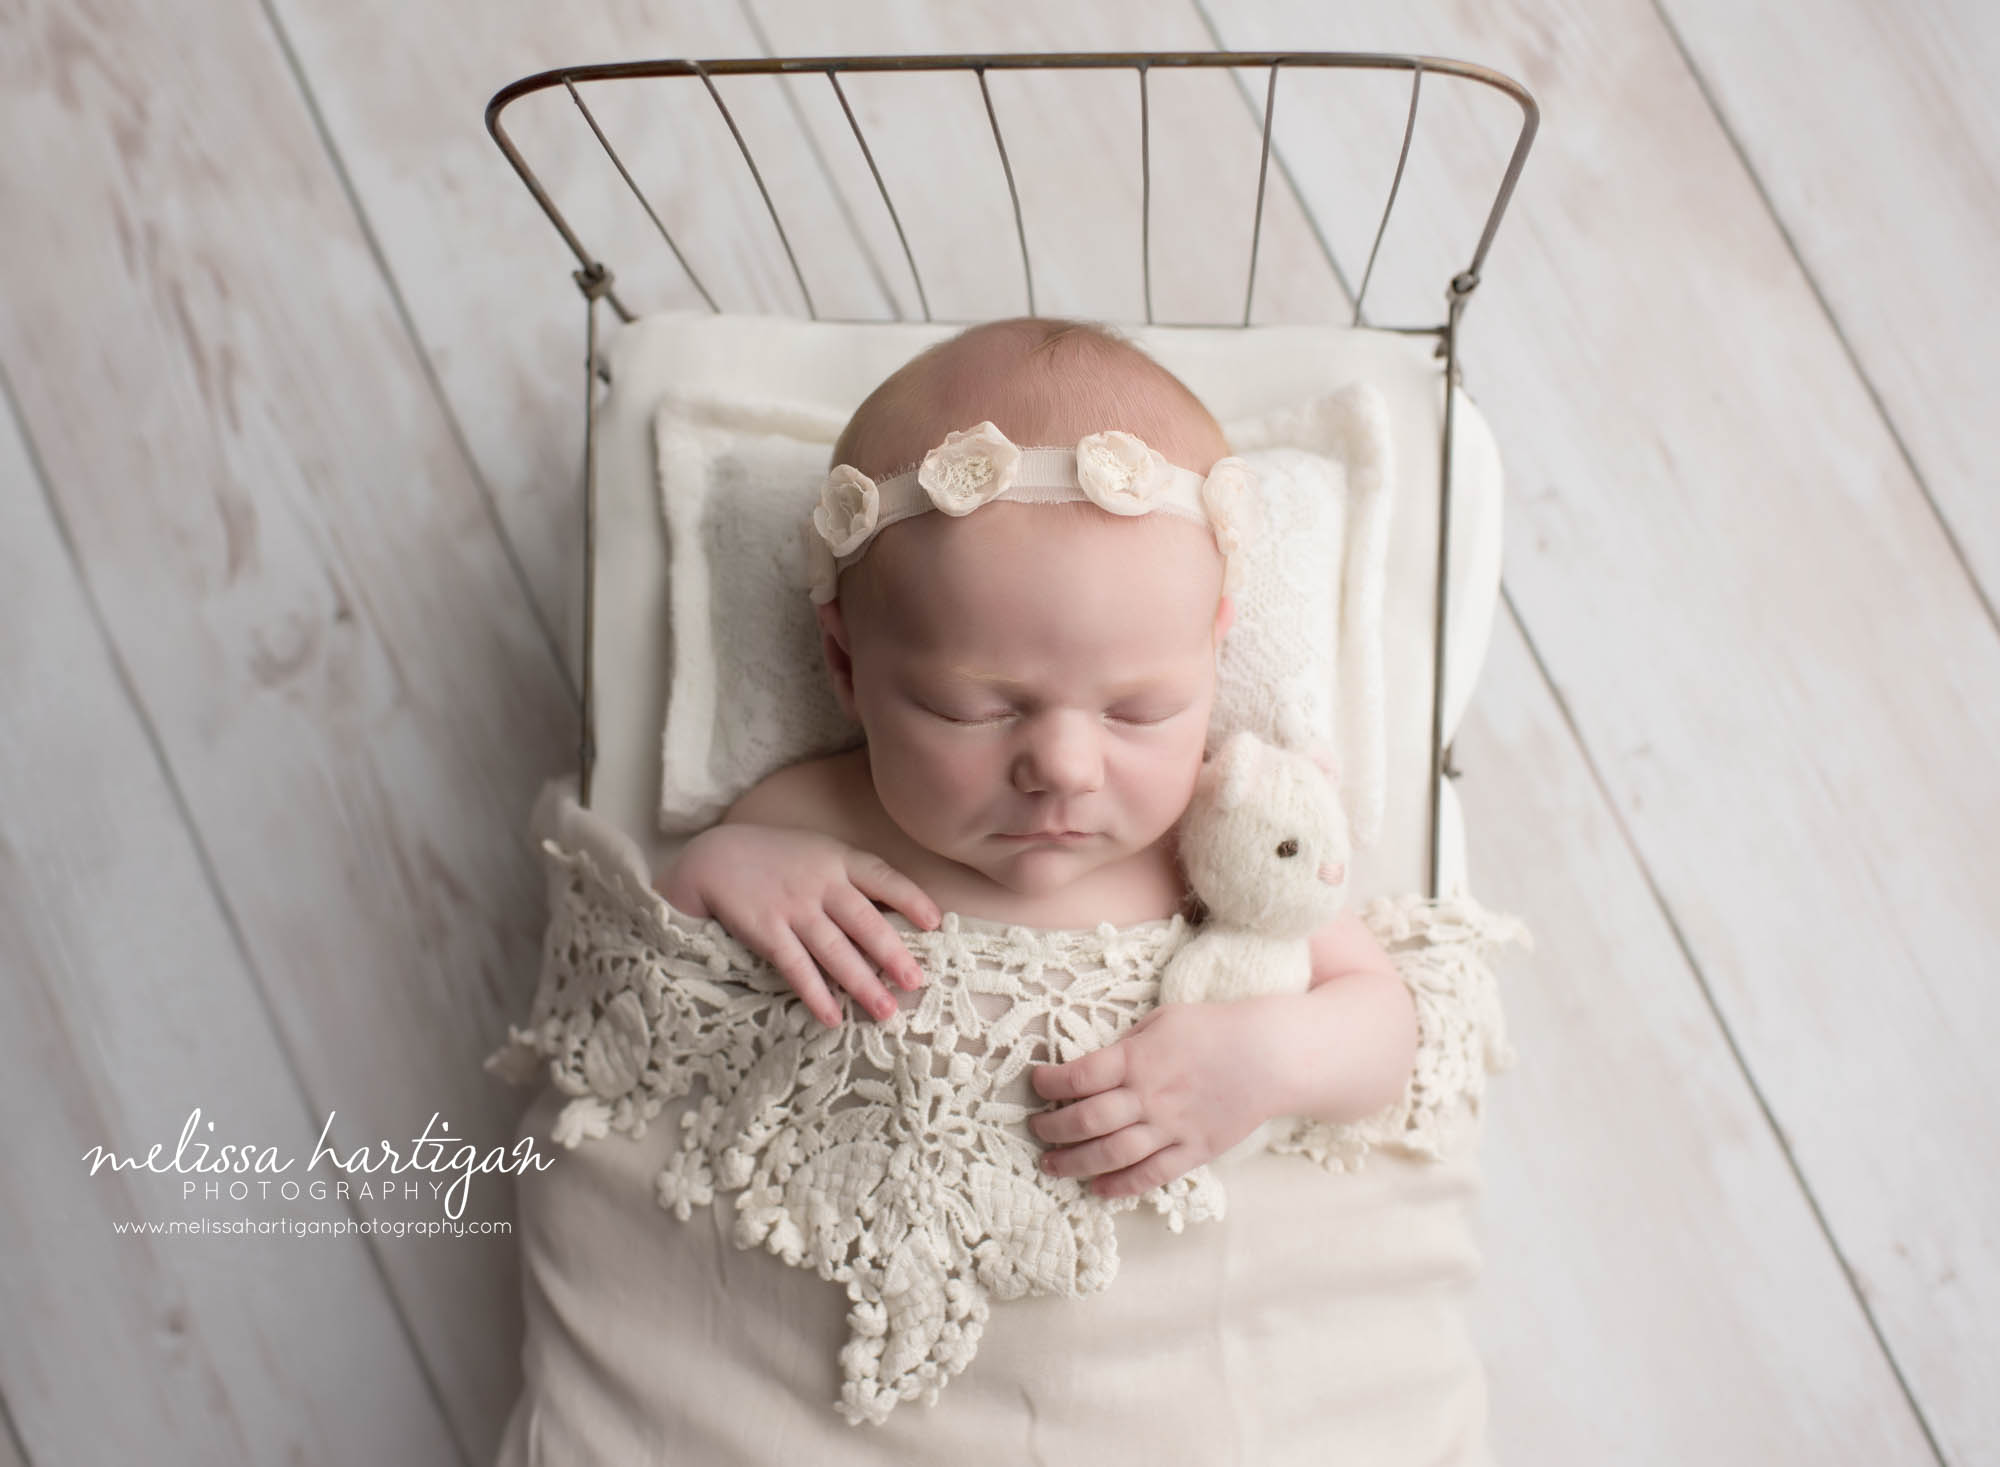 Melissa Hartigan Photography Connecticut Newborn Photographer in Coventry baby girl sleeping in little bed under white lace blanket wearing white floral headband and holding a white little bear